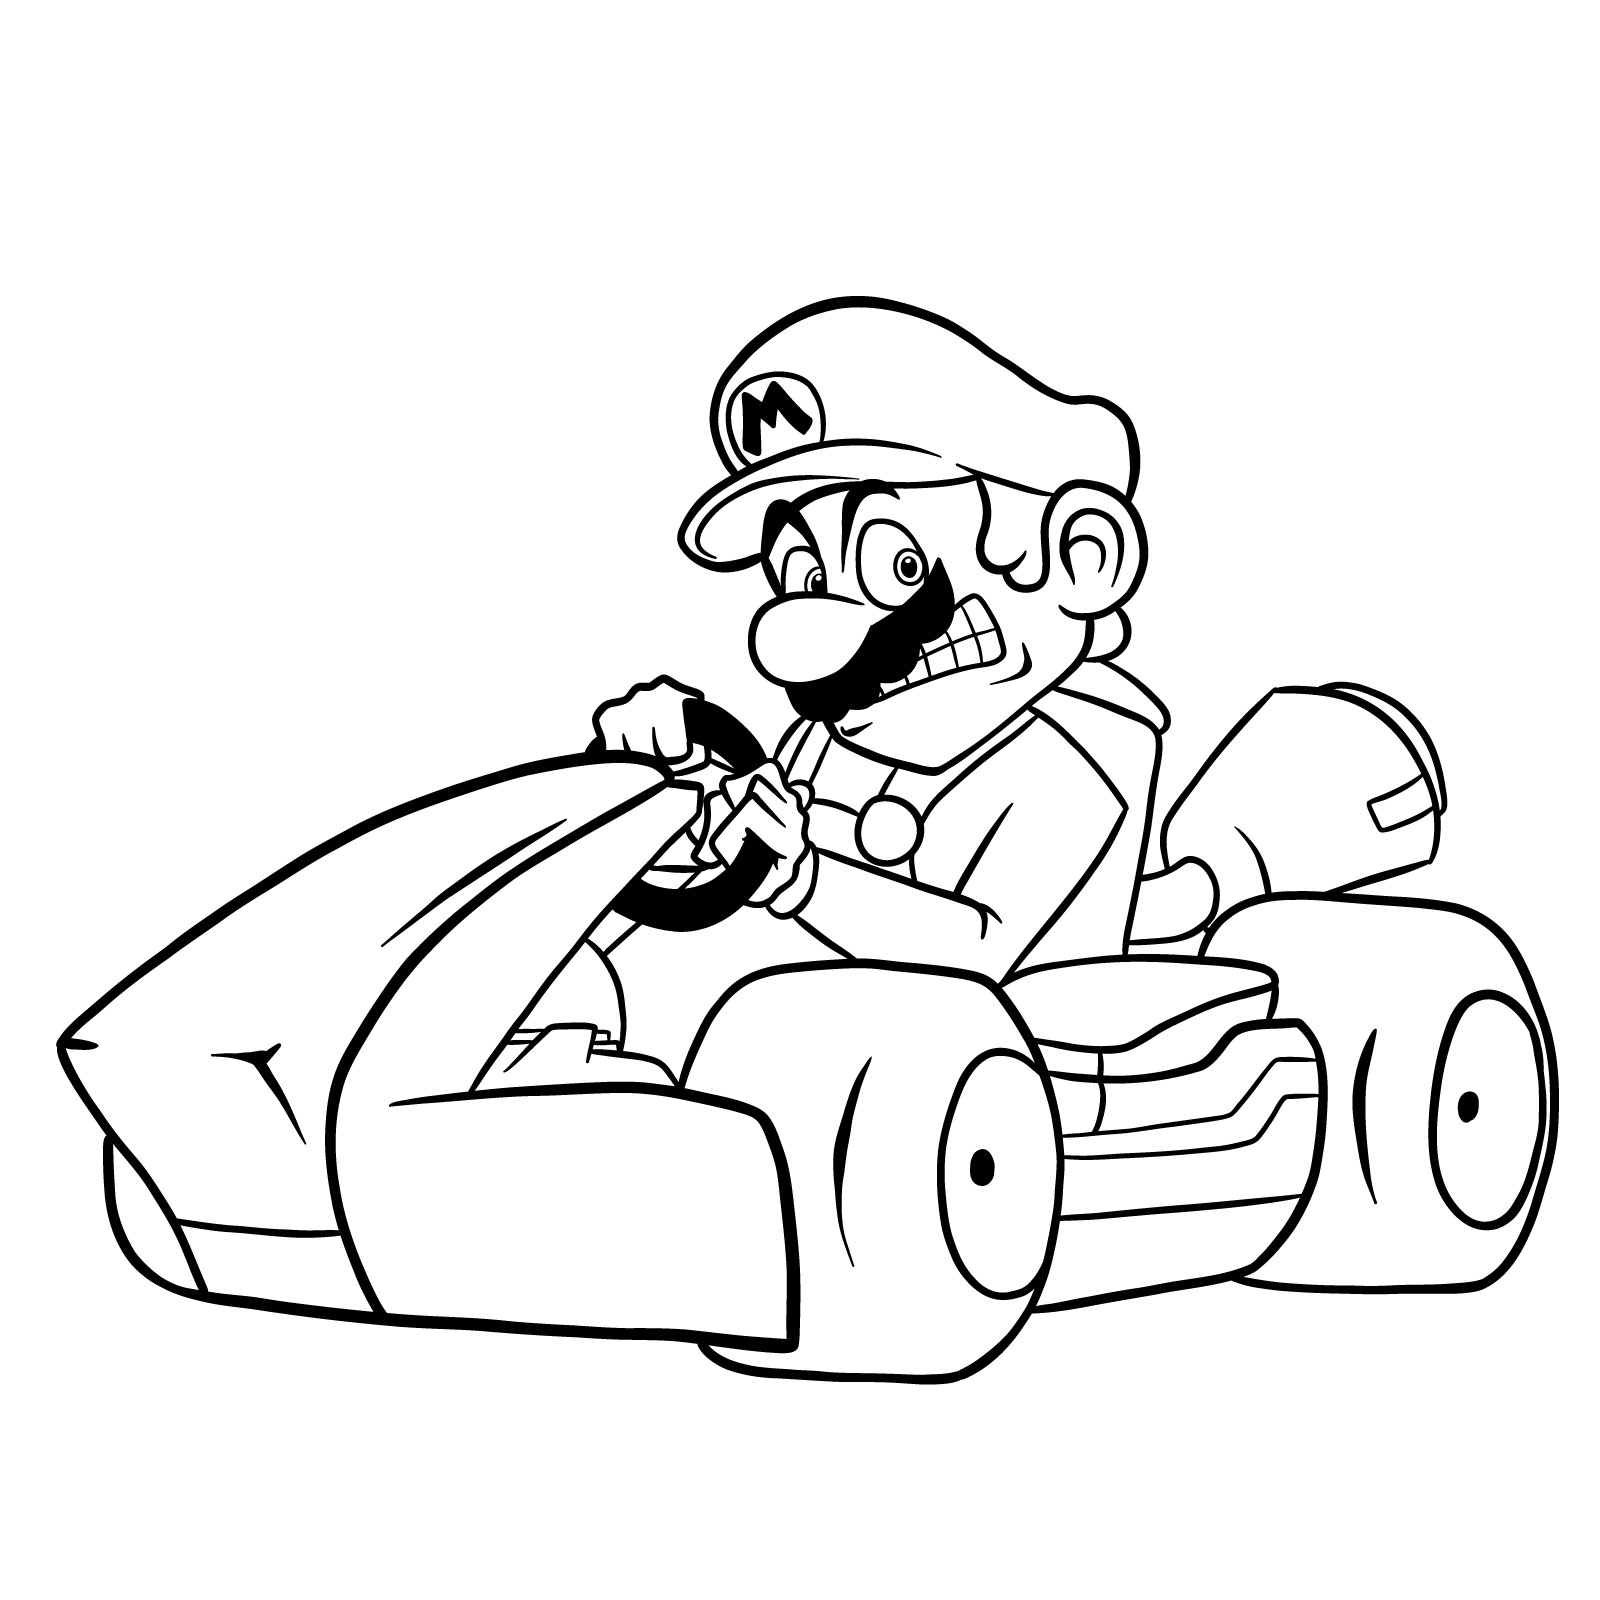 How to draw Race Traitors Mario - final step